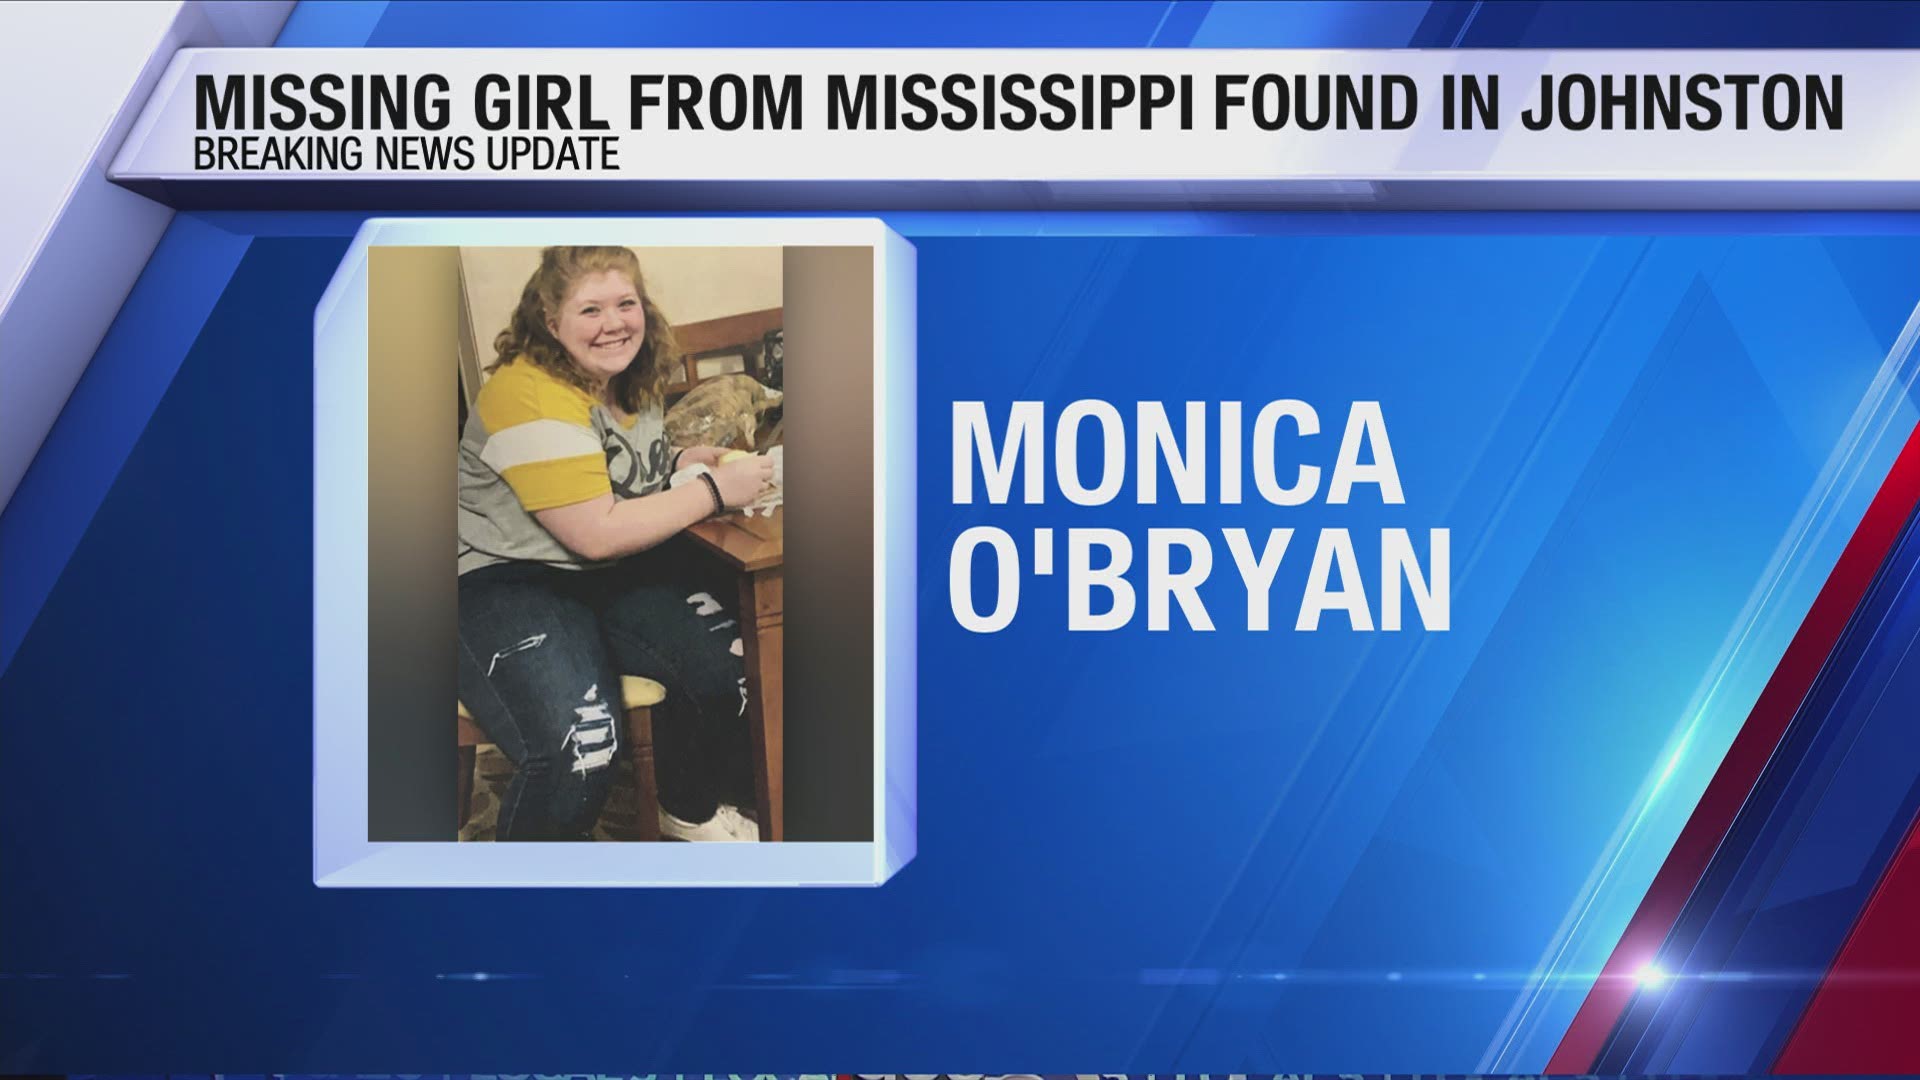 Monica O'Bryan had been missing since February 25.